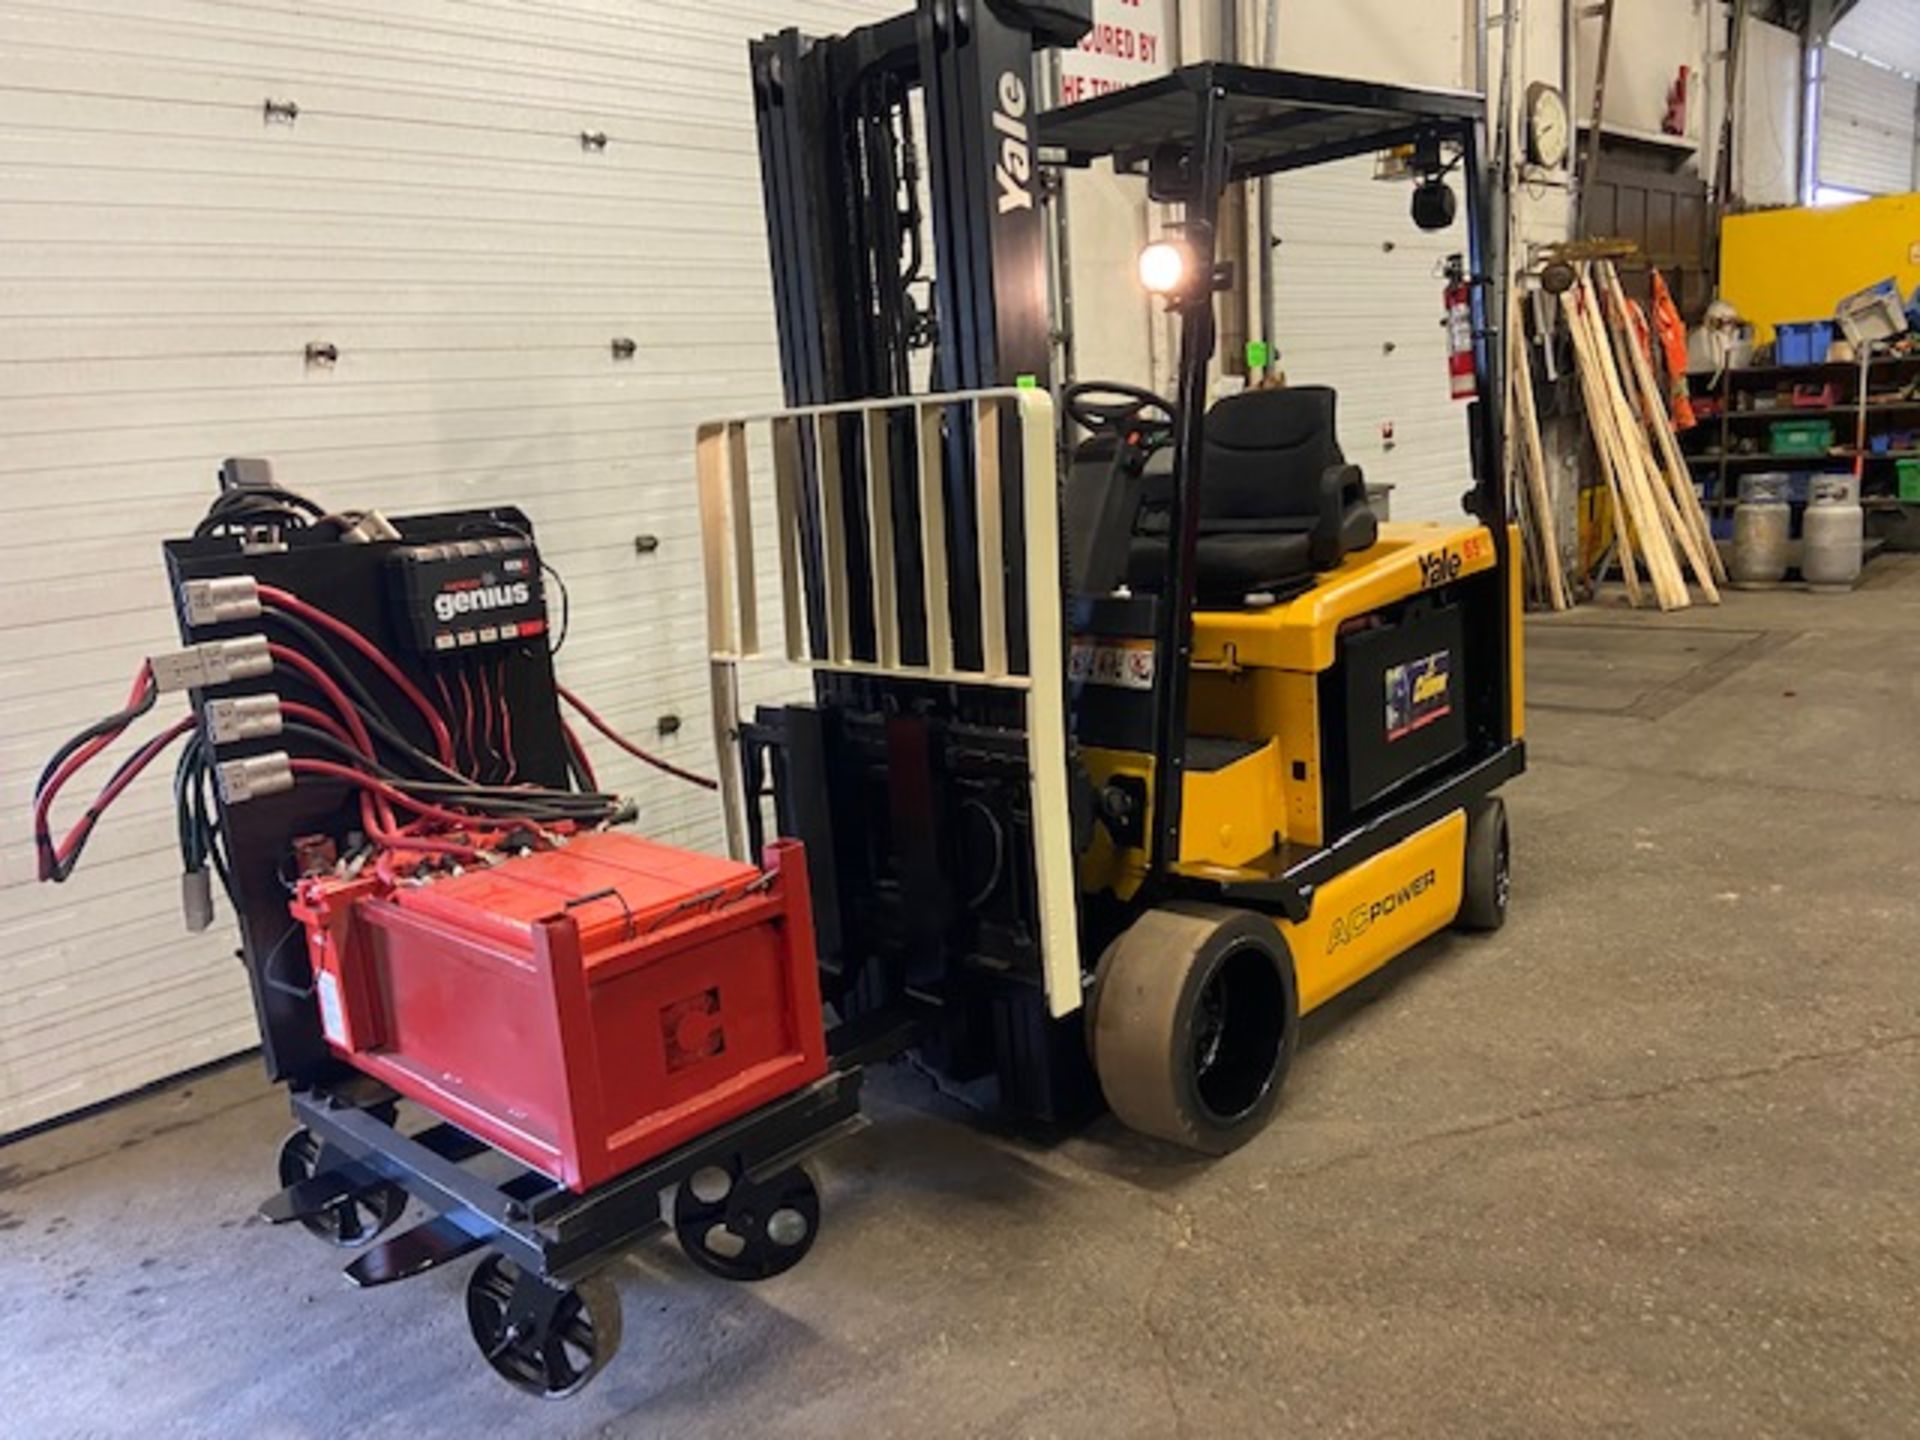 FREE CUSTOMS - 2008 Yale 6500lbs Capacity Forklift Electric with 3-STAGE MAST sideshift (battery - Image 2 of 3